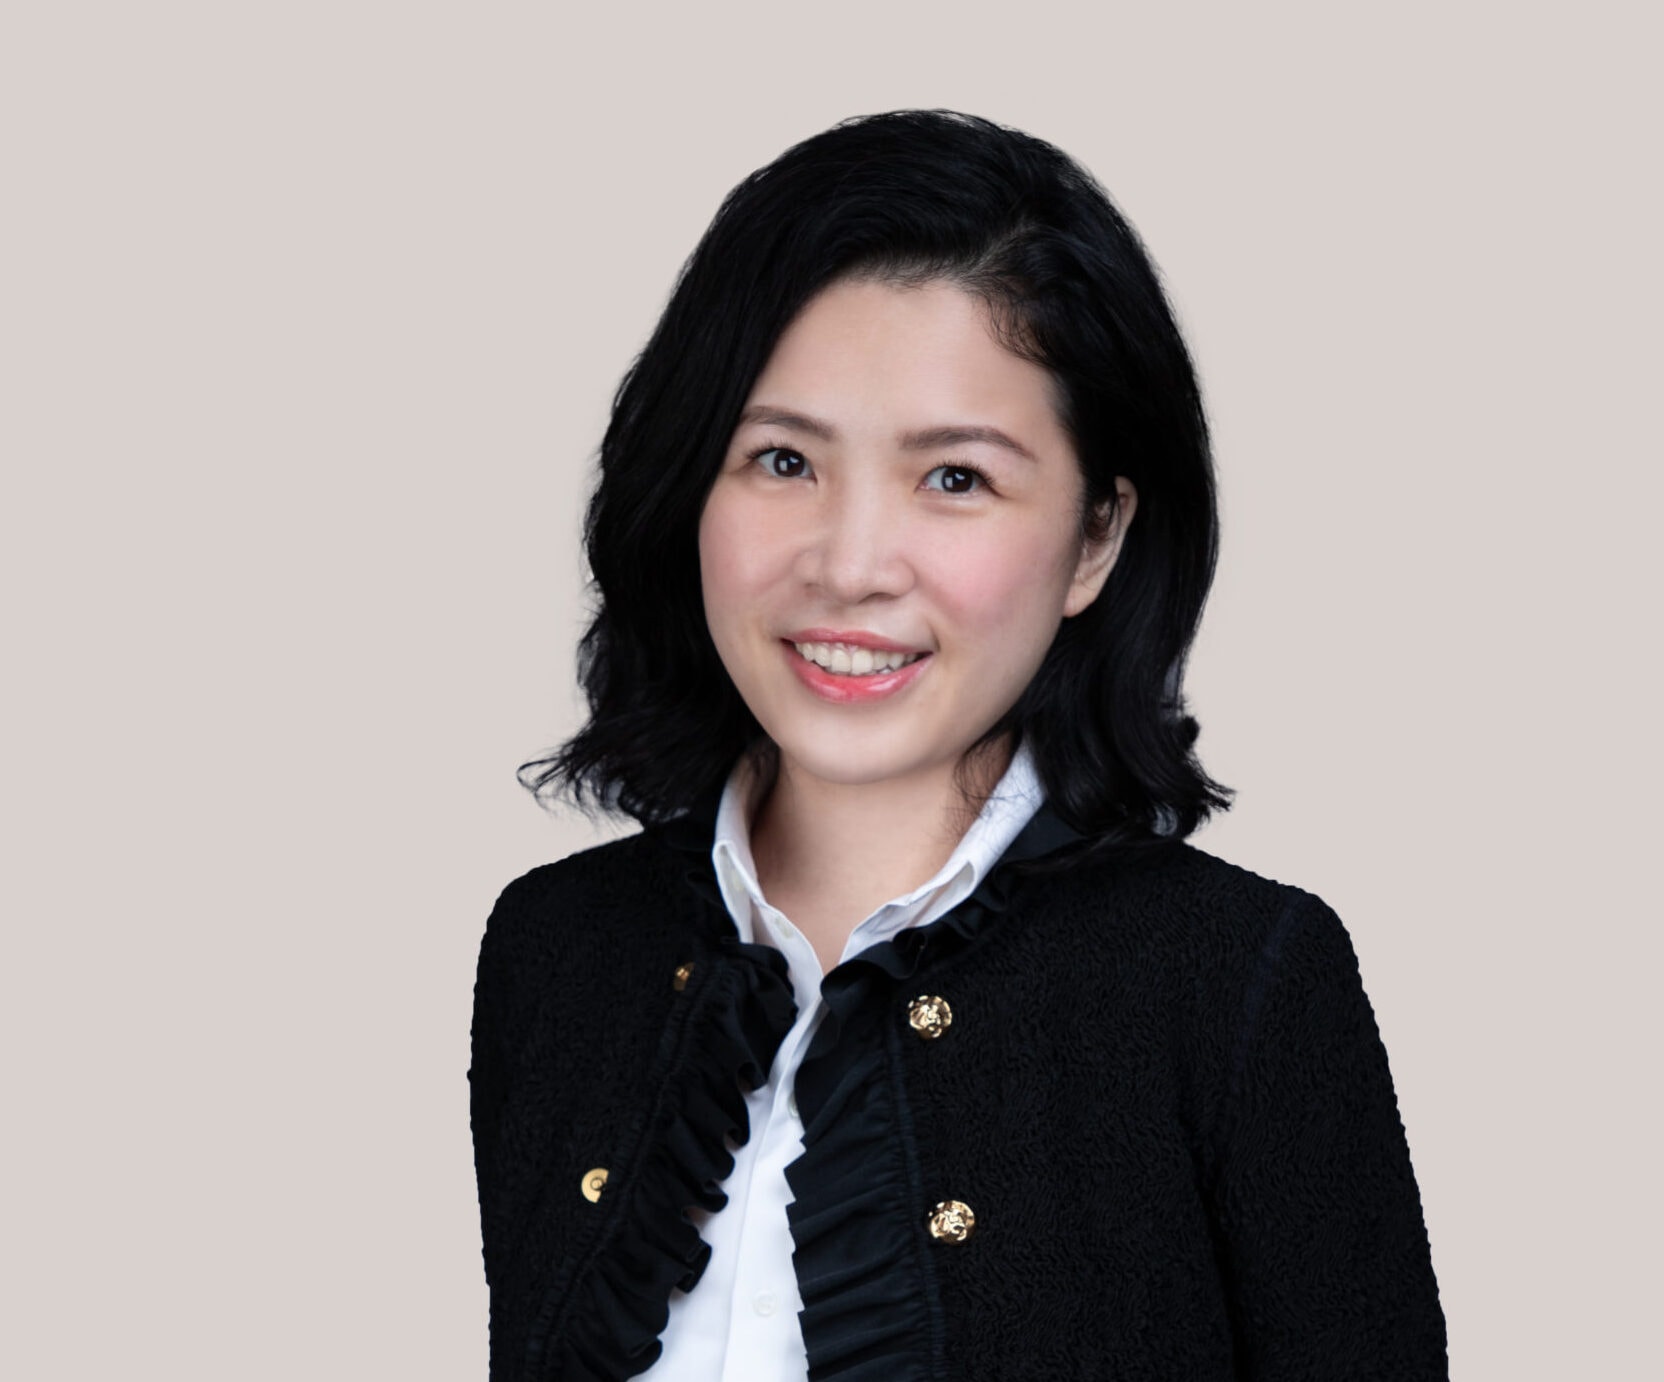 Tracy Yip Corporate Commercial Lawyer, Partner at Oldham, Li & Nie, Hong Kong